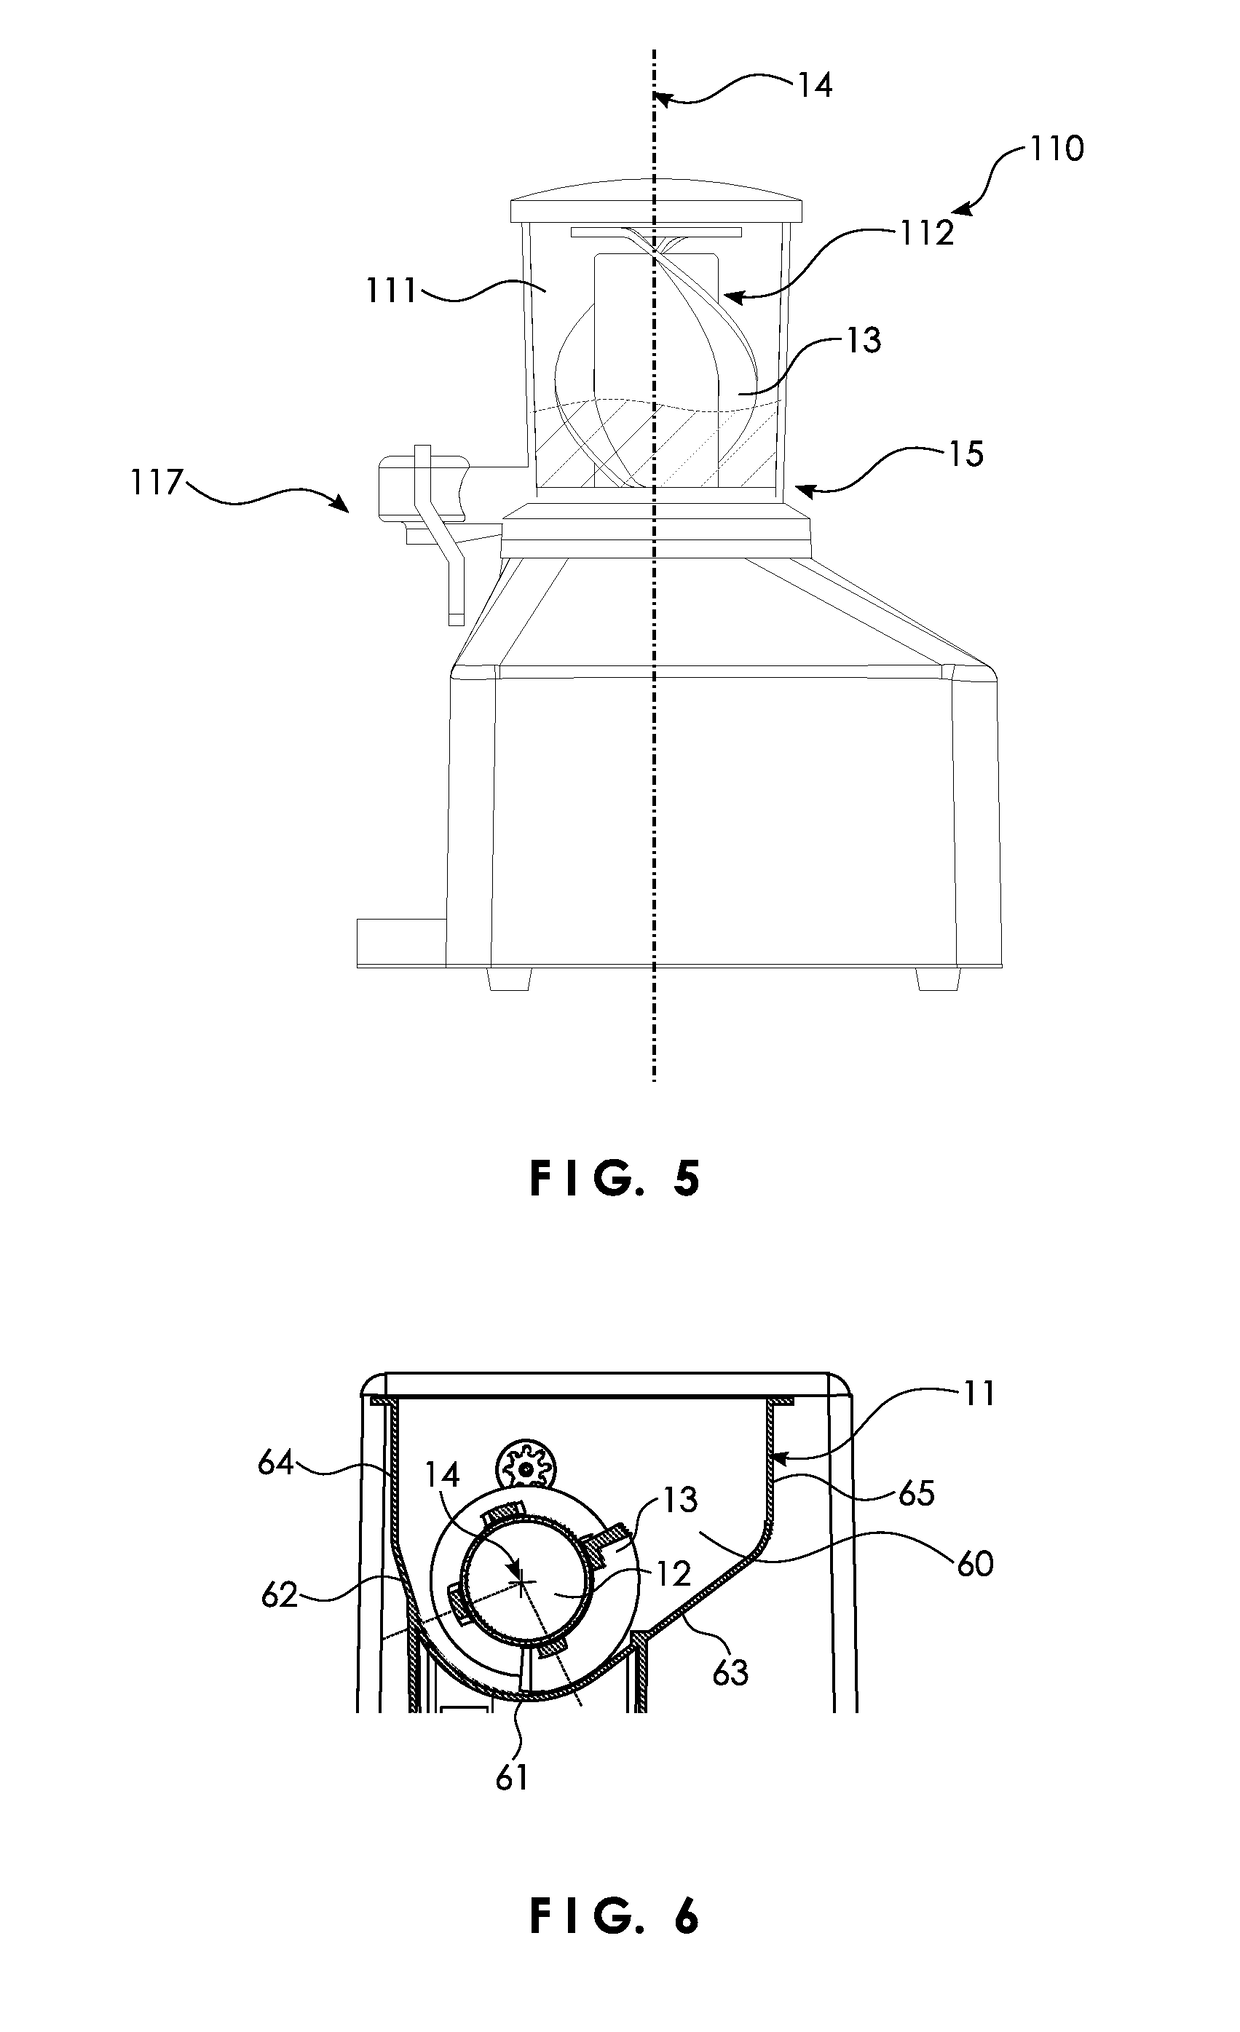 Auger-type appliance for making frozen food products